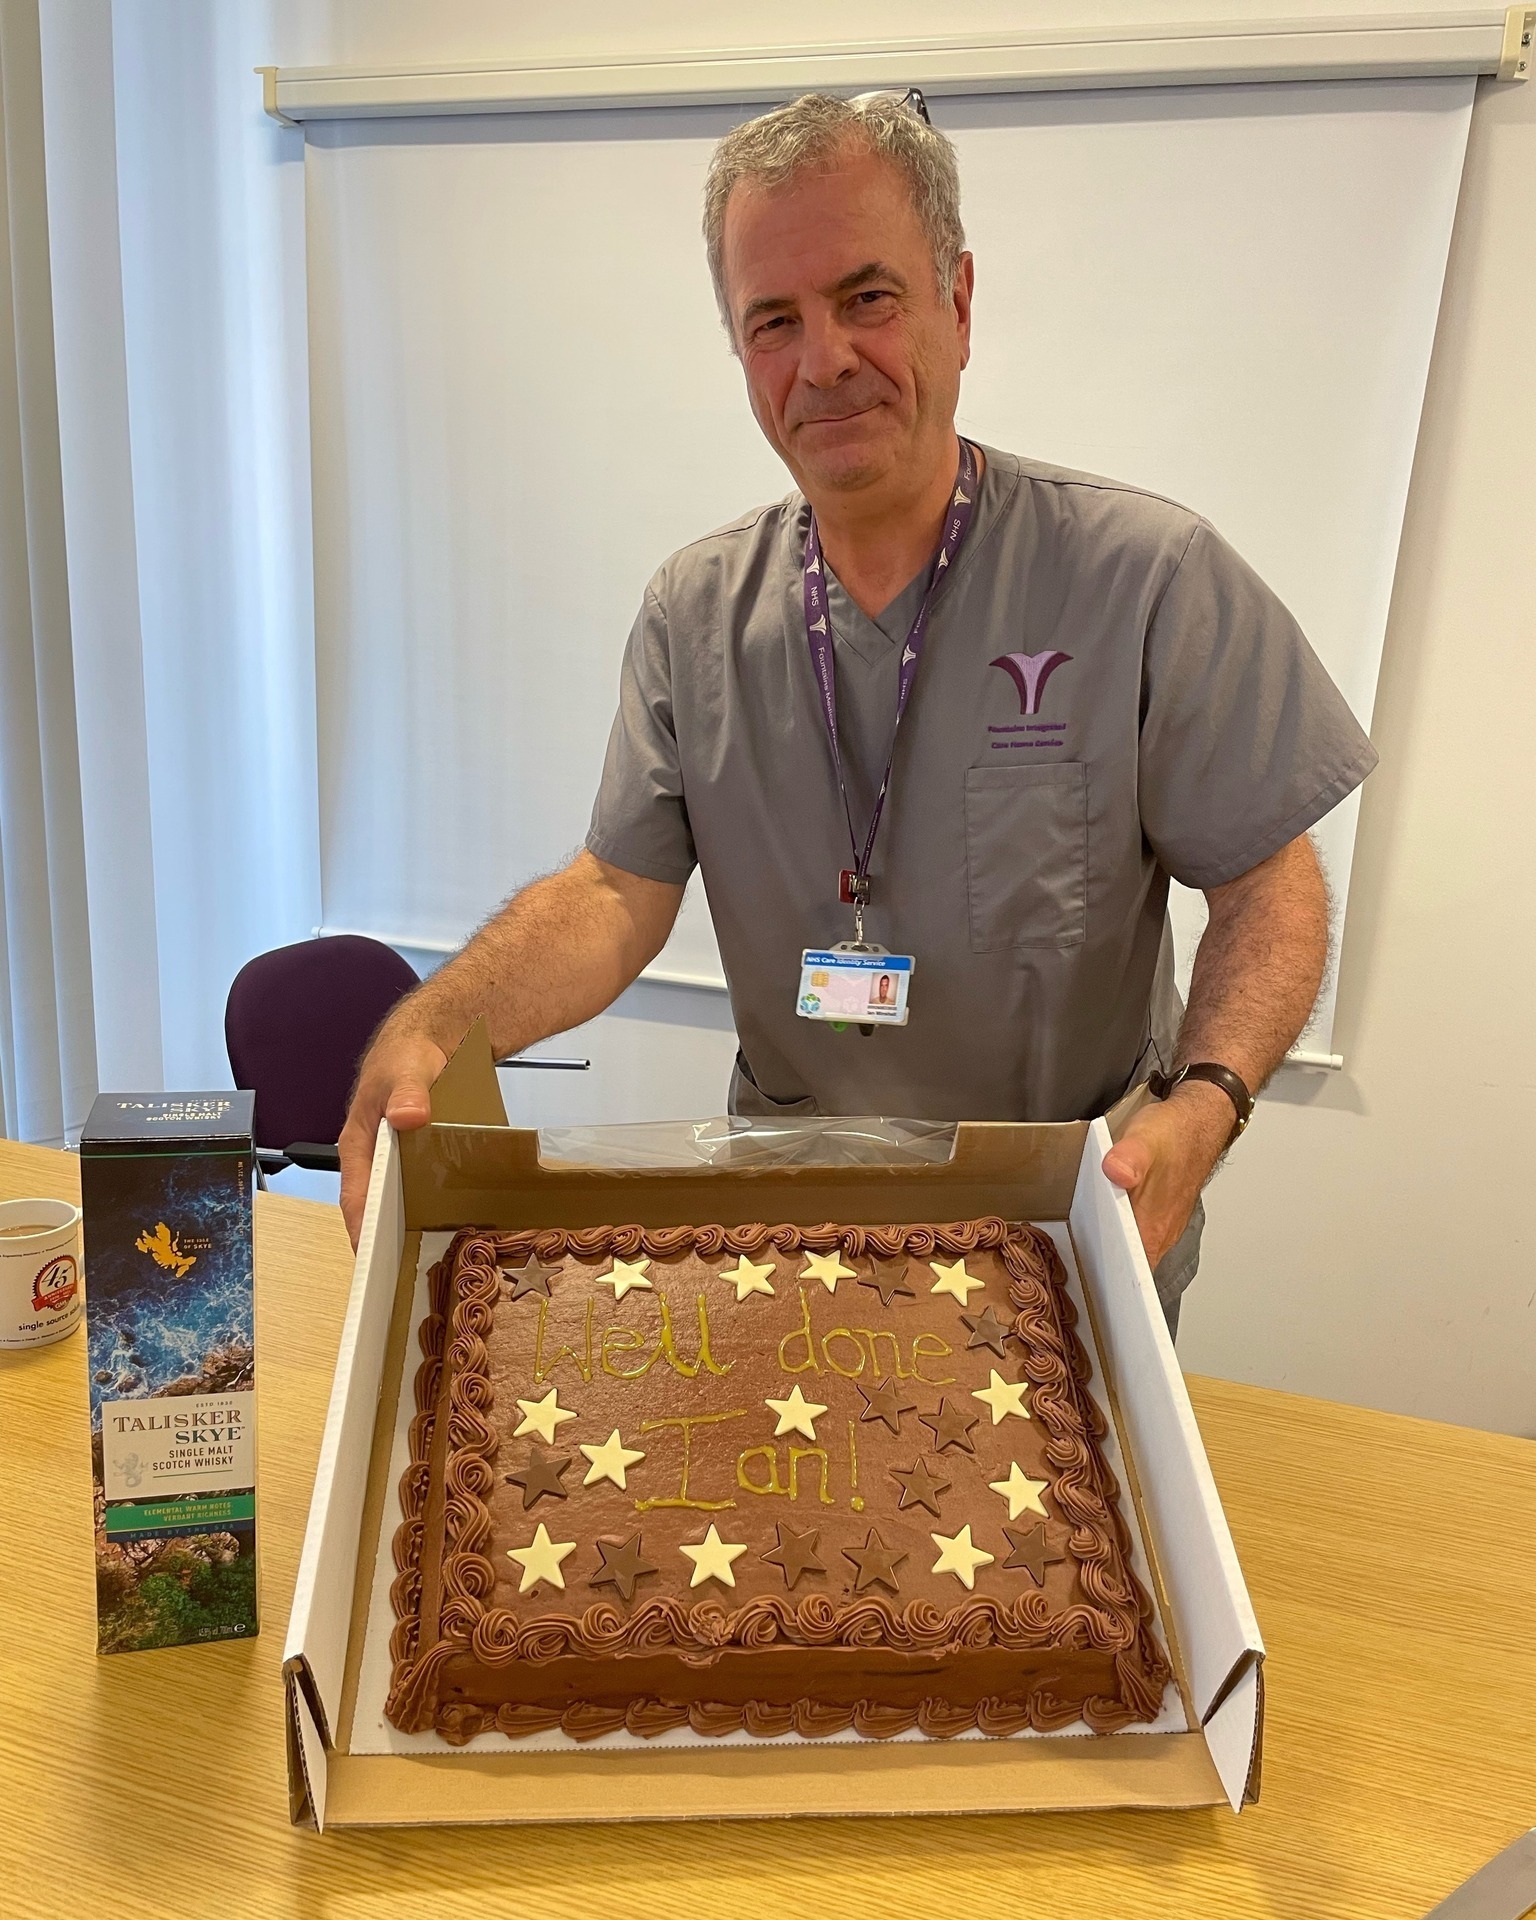 A cake presented to Dr Ian Minshull at the Fountains Medical Centre, Chester.